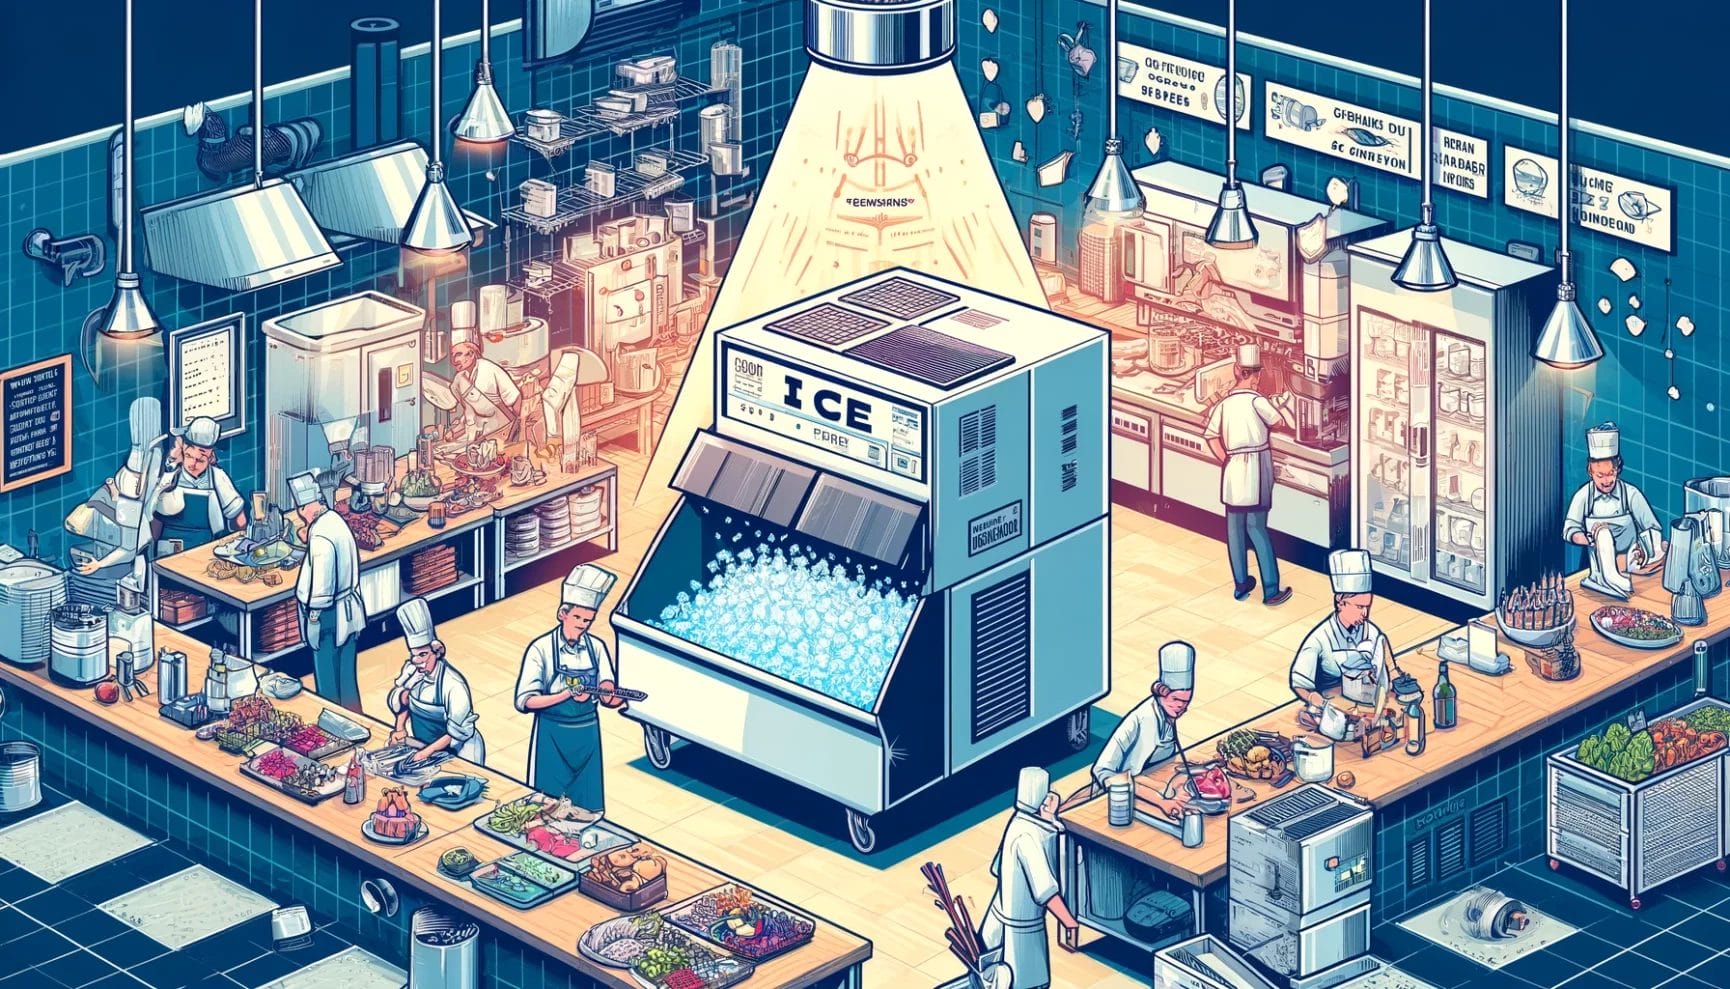 Illustration of a busy restaurant kitchen with chefs preparing food and an oversized ice machine in the center.